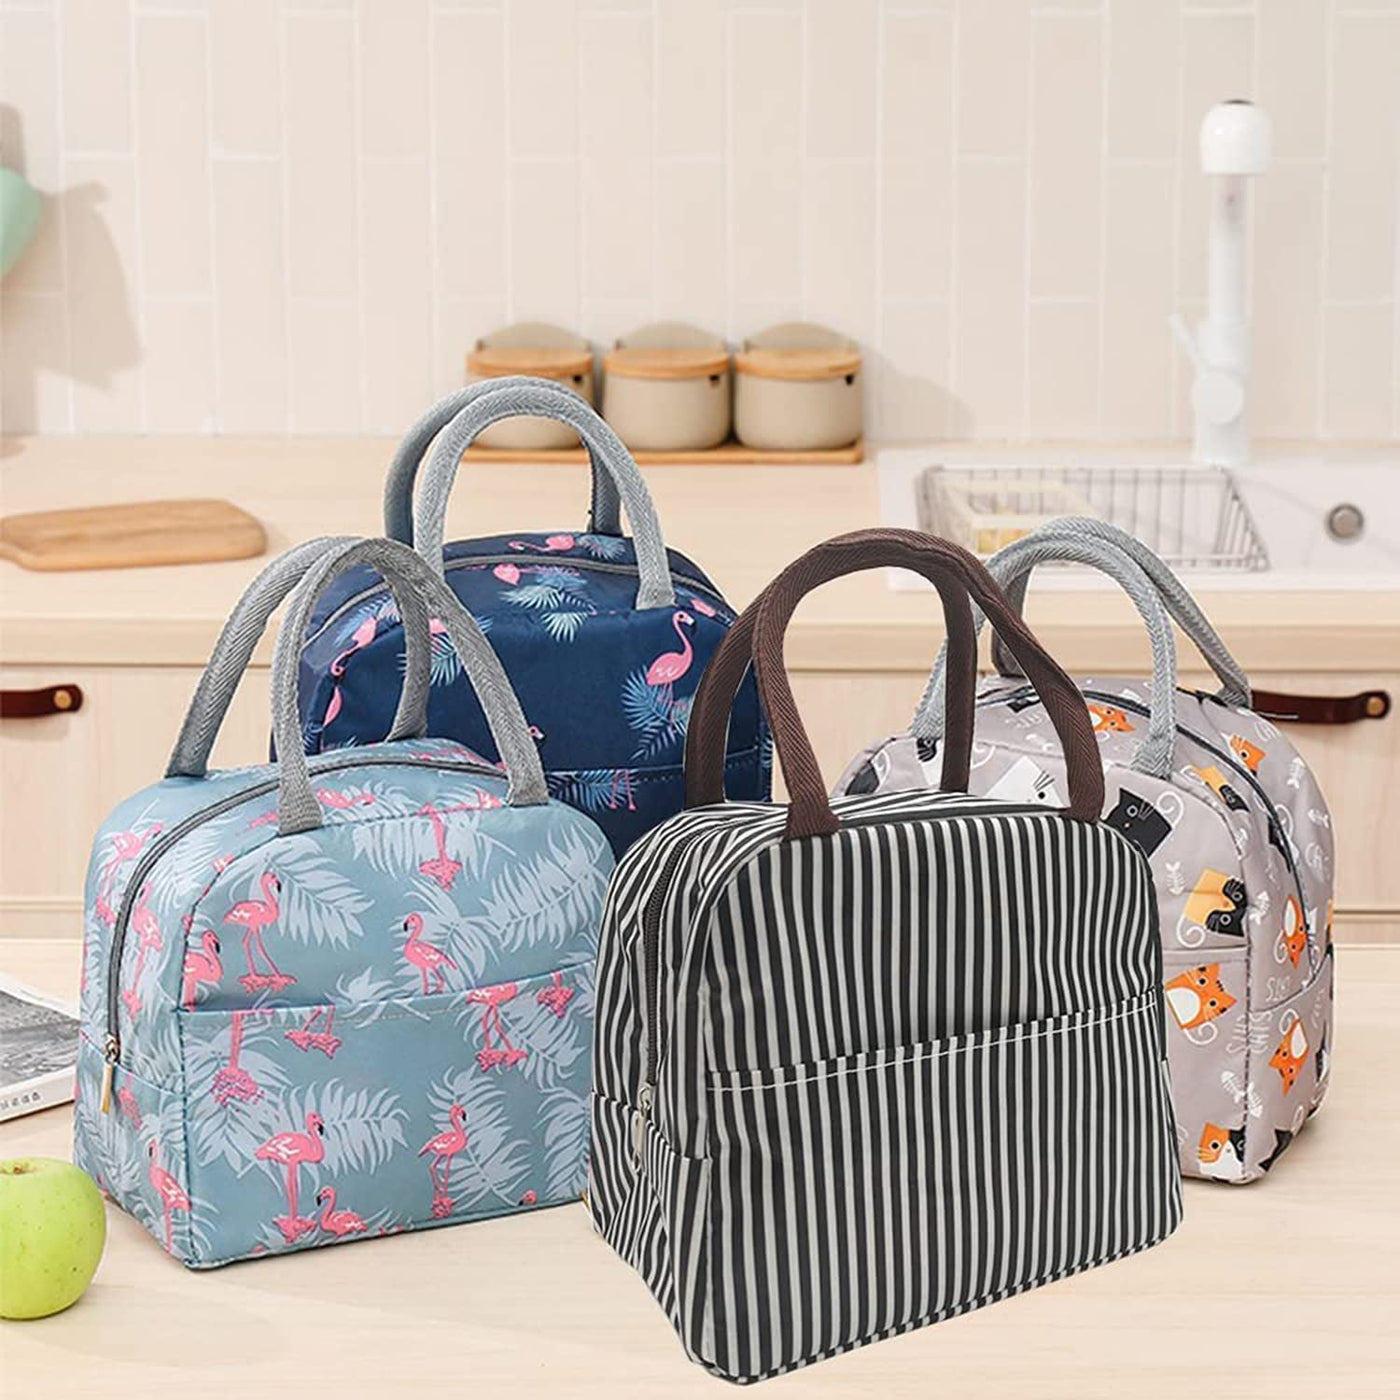 Printed Insulated Lunch Bags